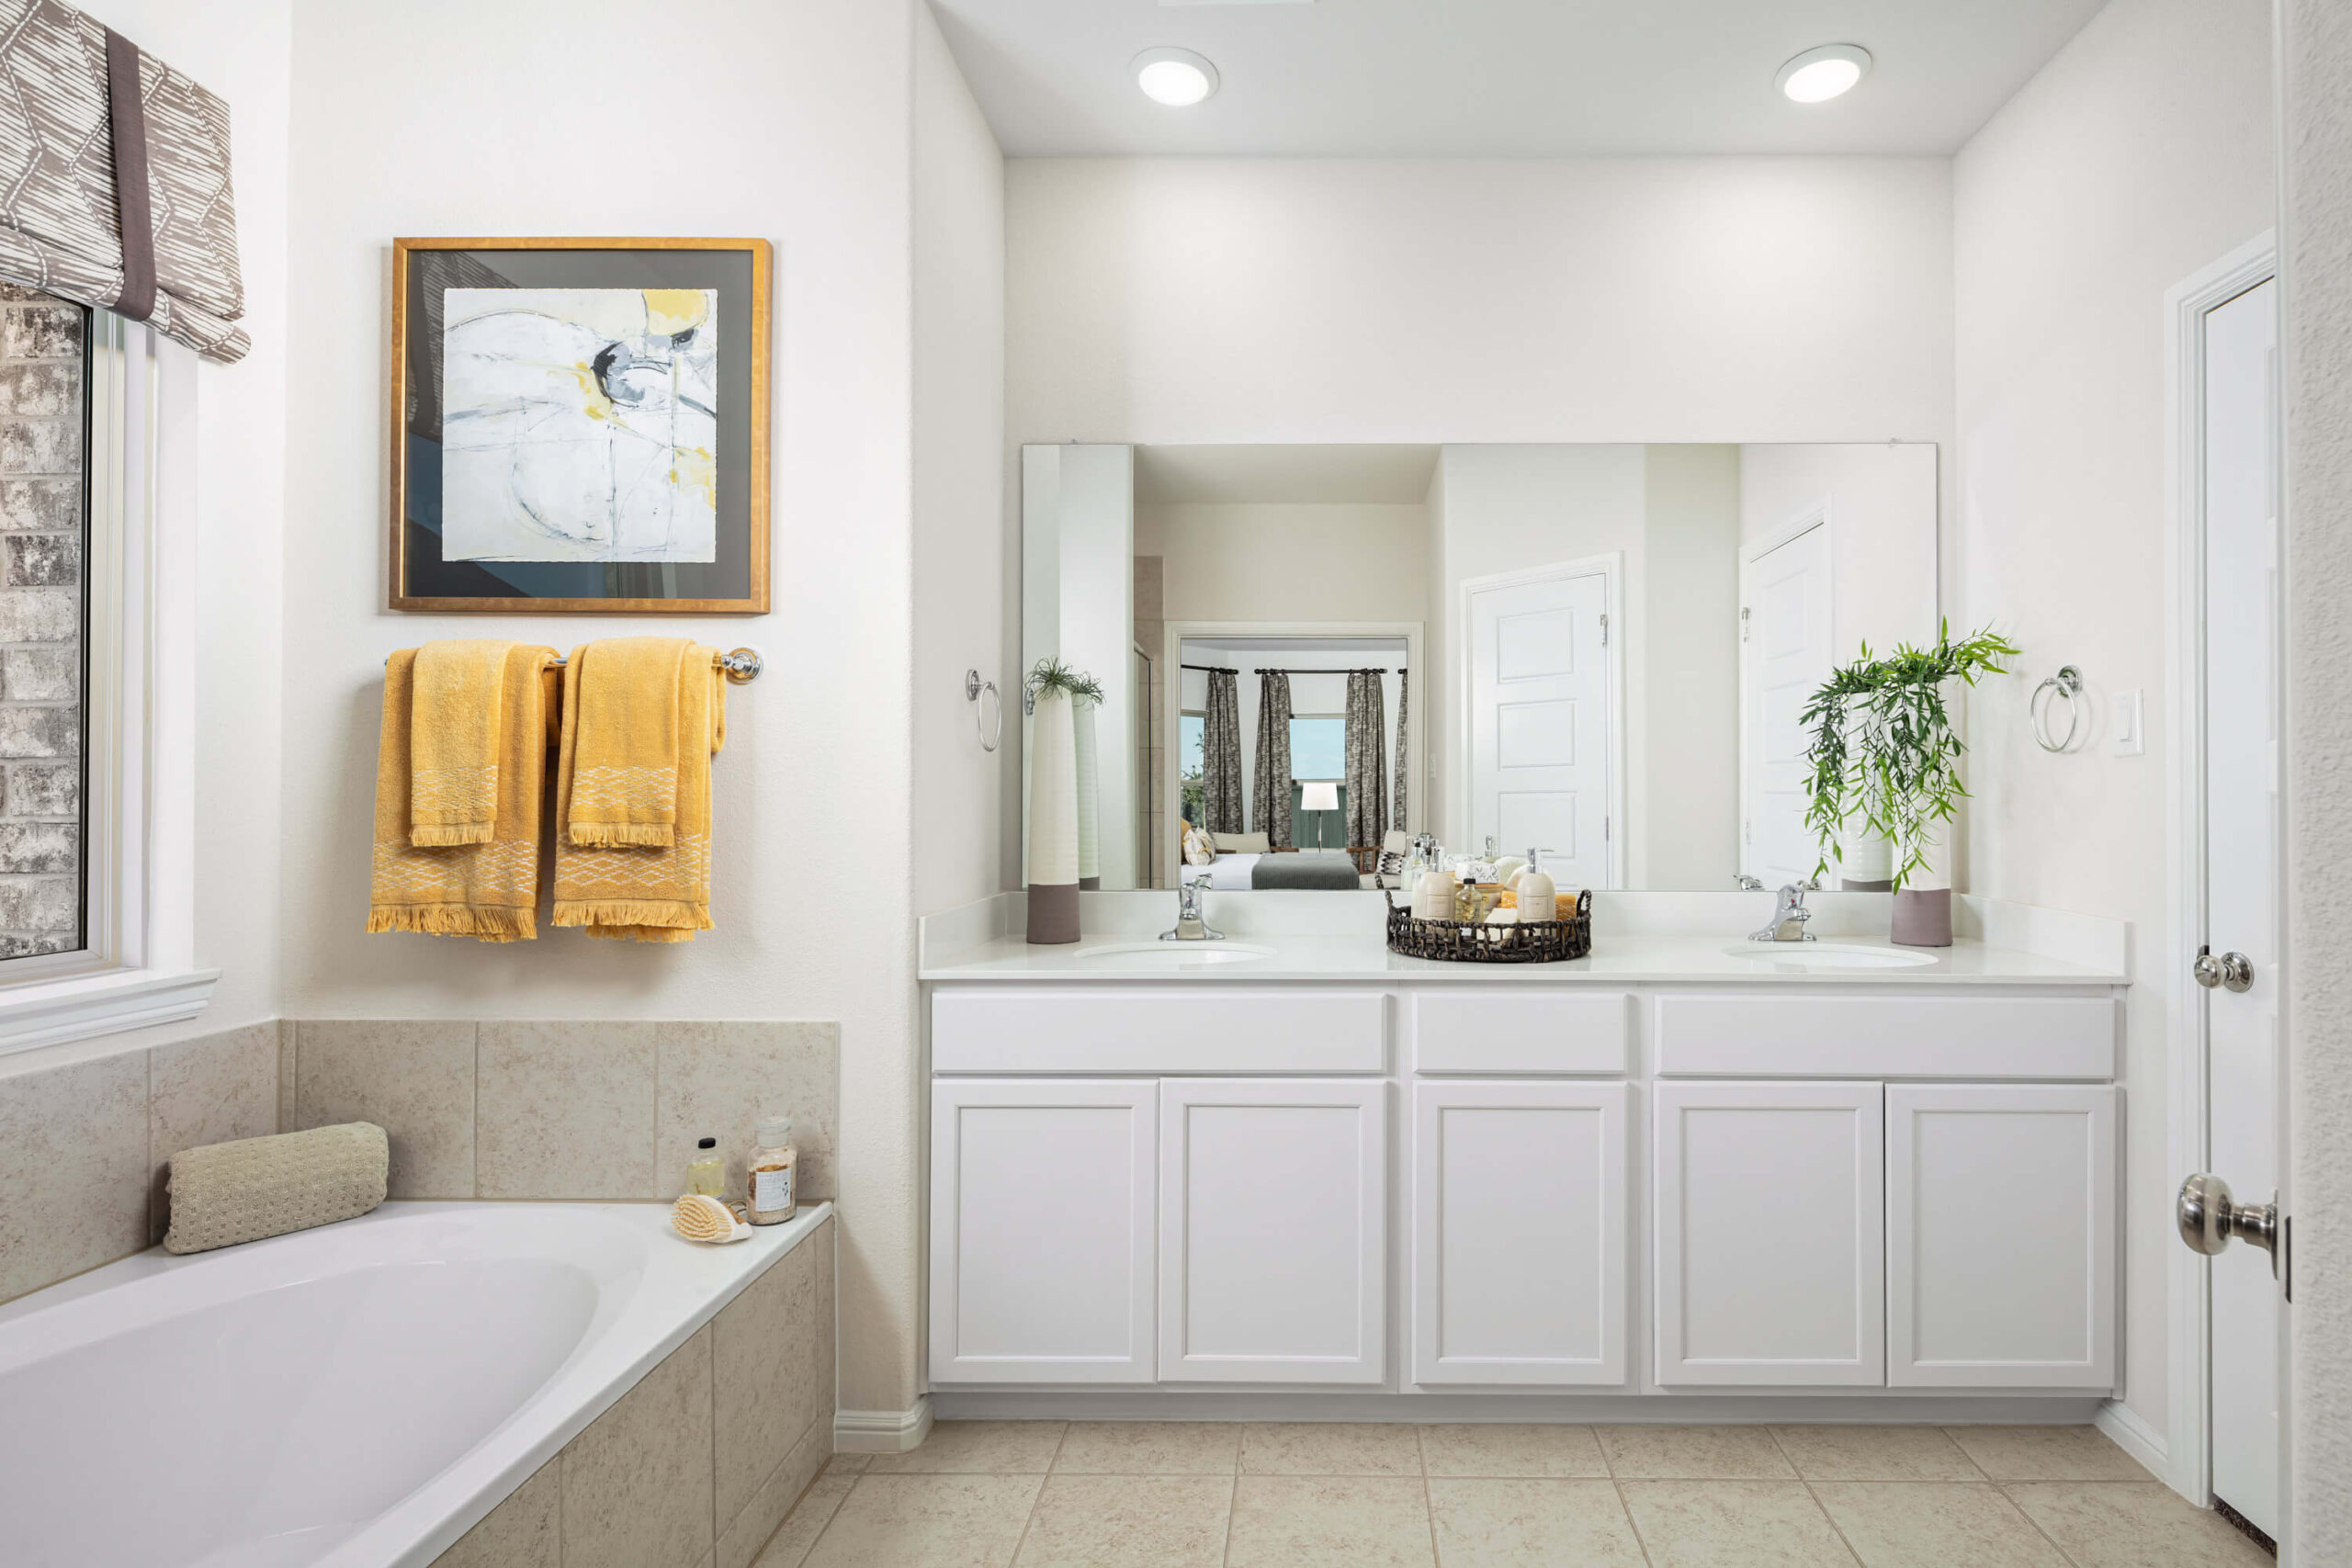 A bright and clean bathroom in new homes in Goodland TX with dual vanity sinks, a large mirror, and a bathtub, accented with yellow towels and green plants.